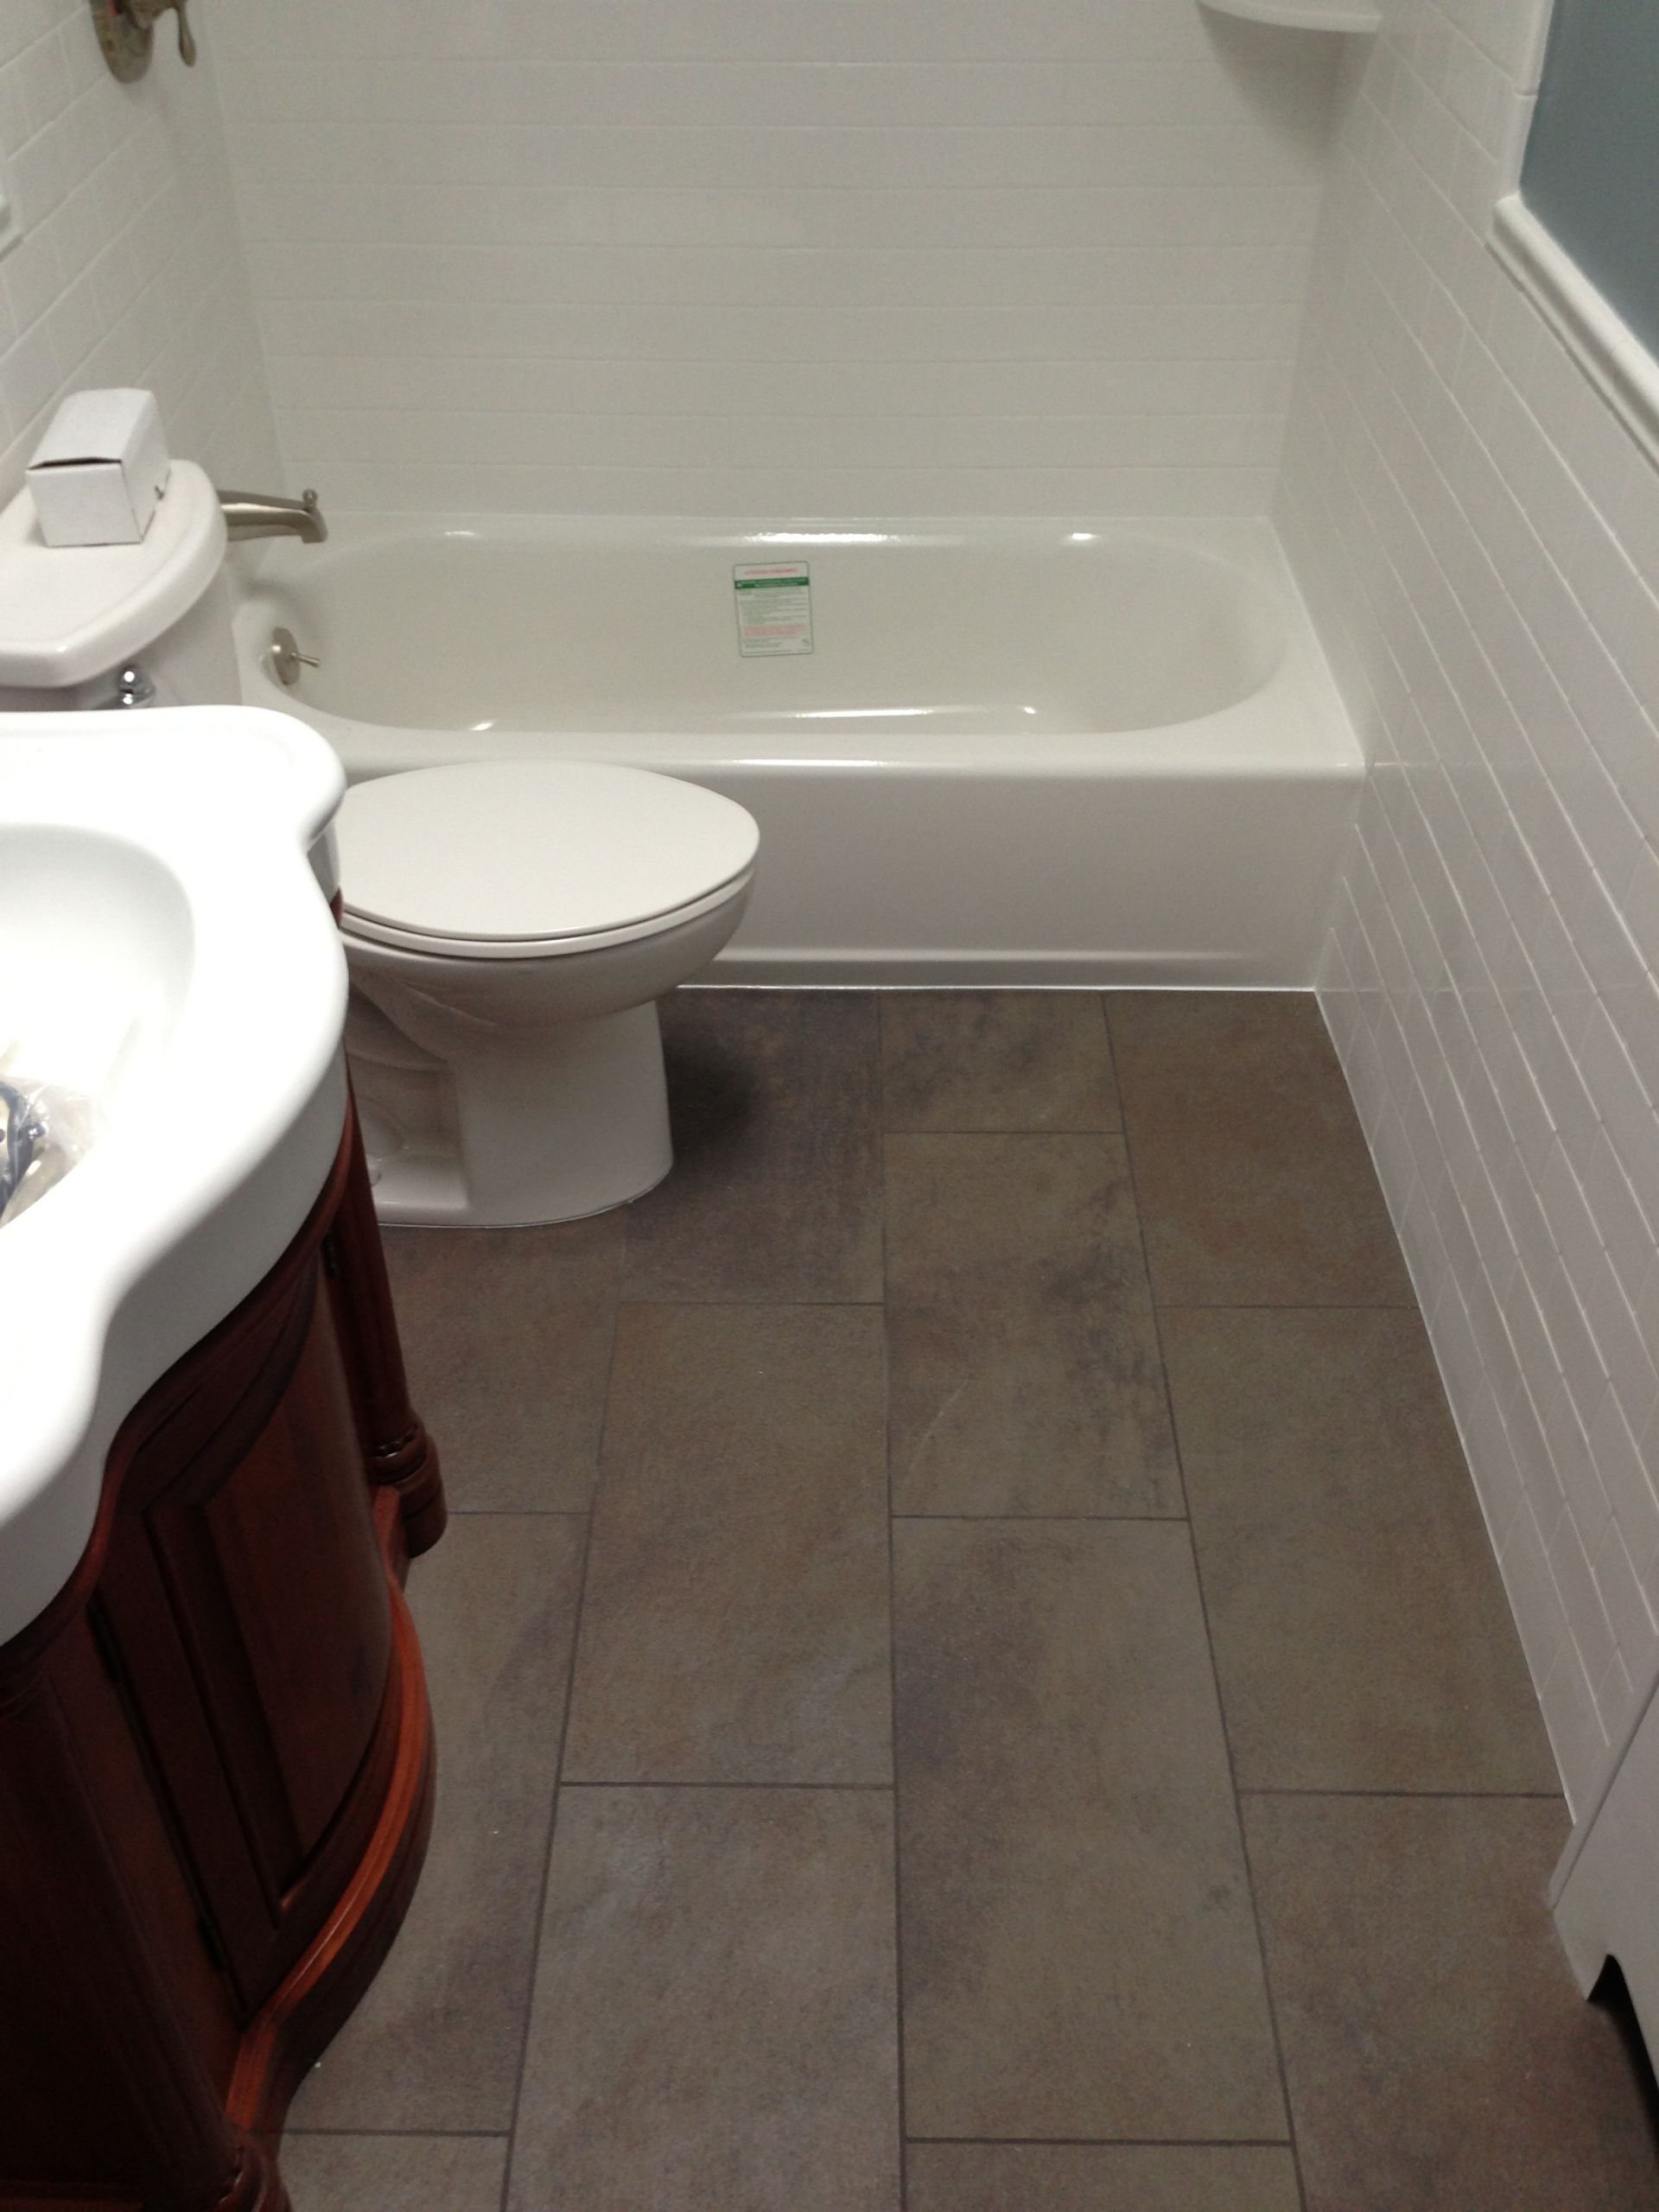 Large Tile In Small Bathroom
 Tile Small Bathroom Tiling Contractor Talk